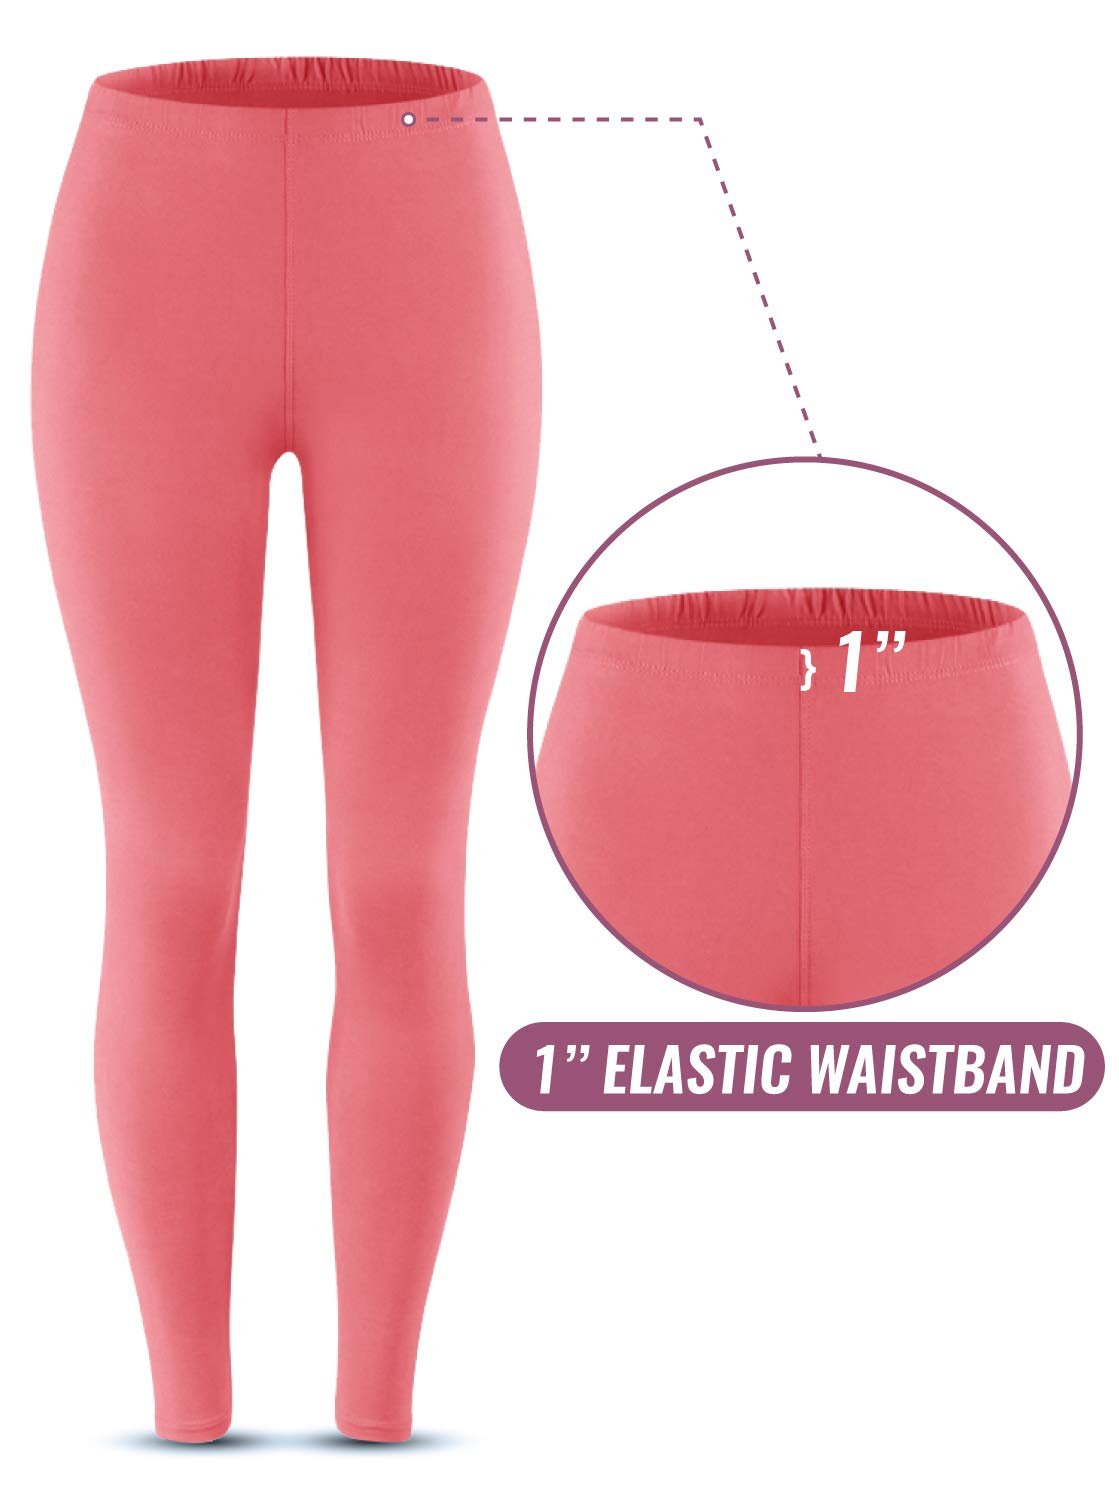 SATINA High Waisted Leggings for Women | Full Length | 1 Inch Waistband (Coral, One Size)